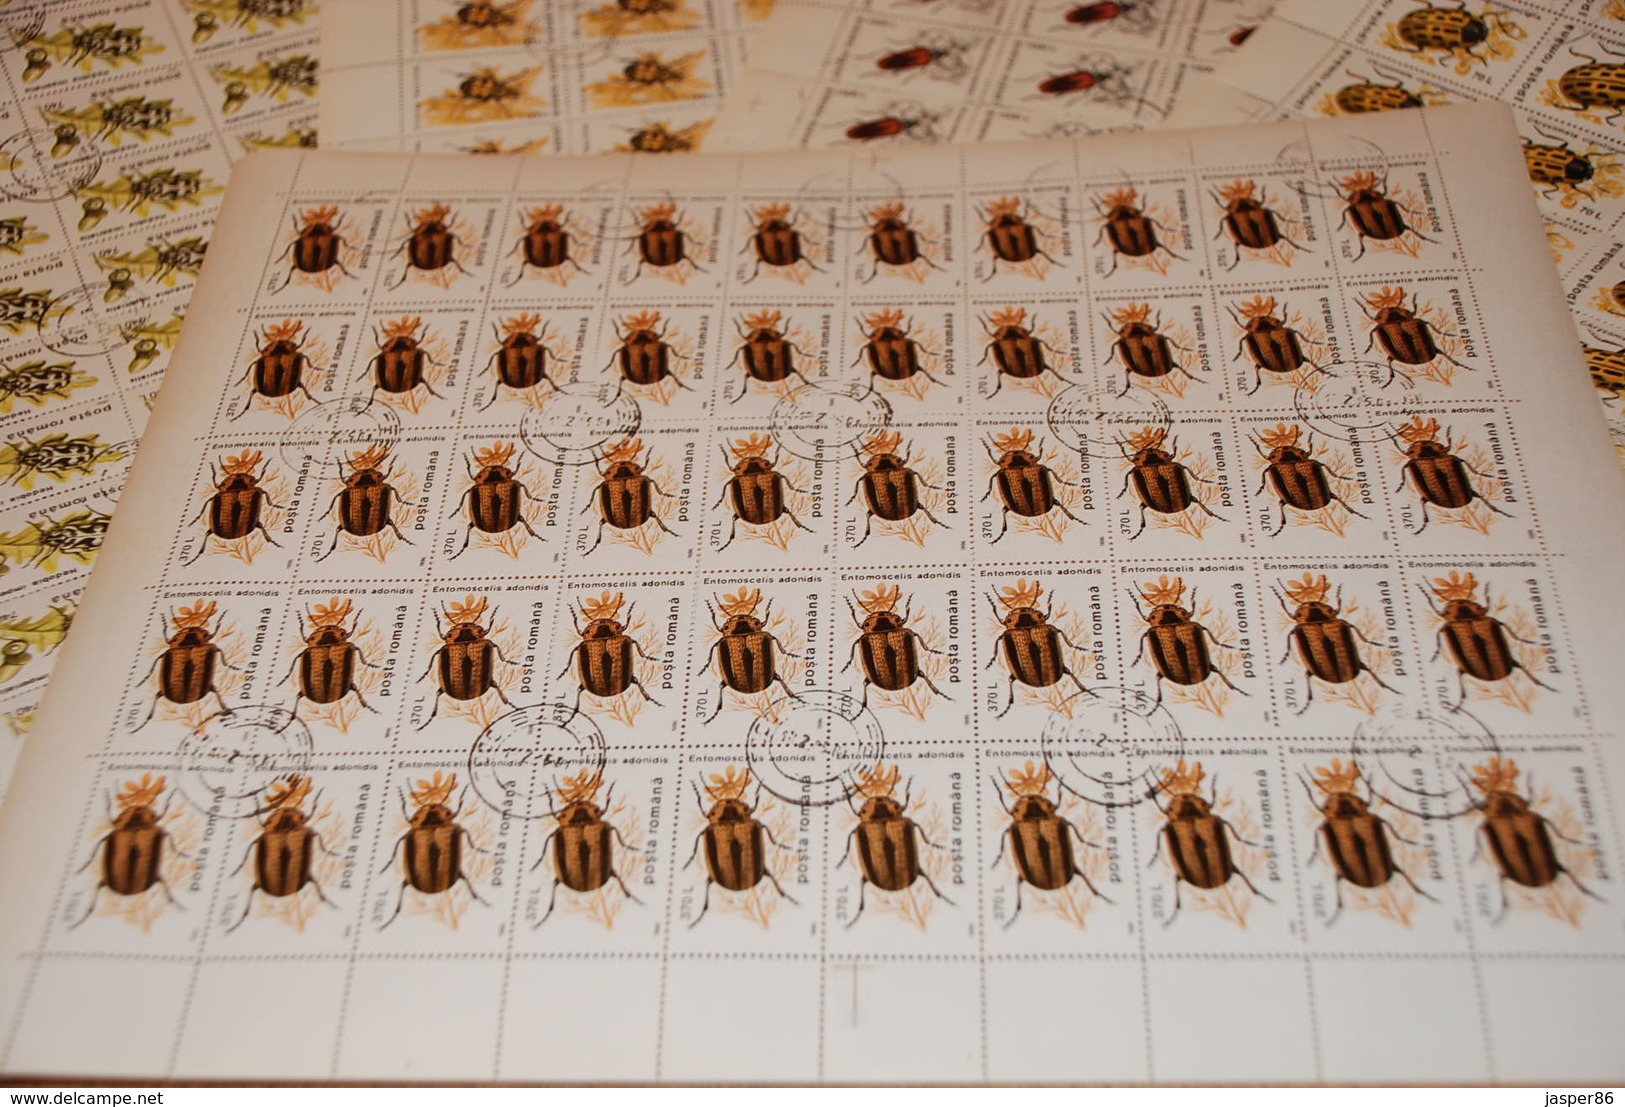 ROMANIA 500 Insects Sc 4082-4091, 50 X COMPLETE Sets WHOLESALE CV$112.50 - Hojas Completas